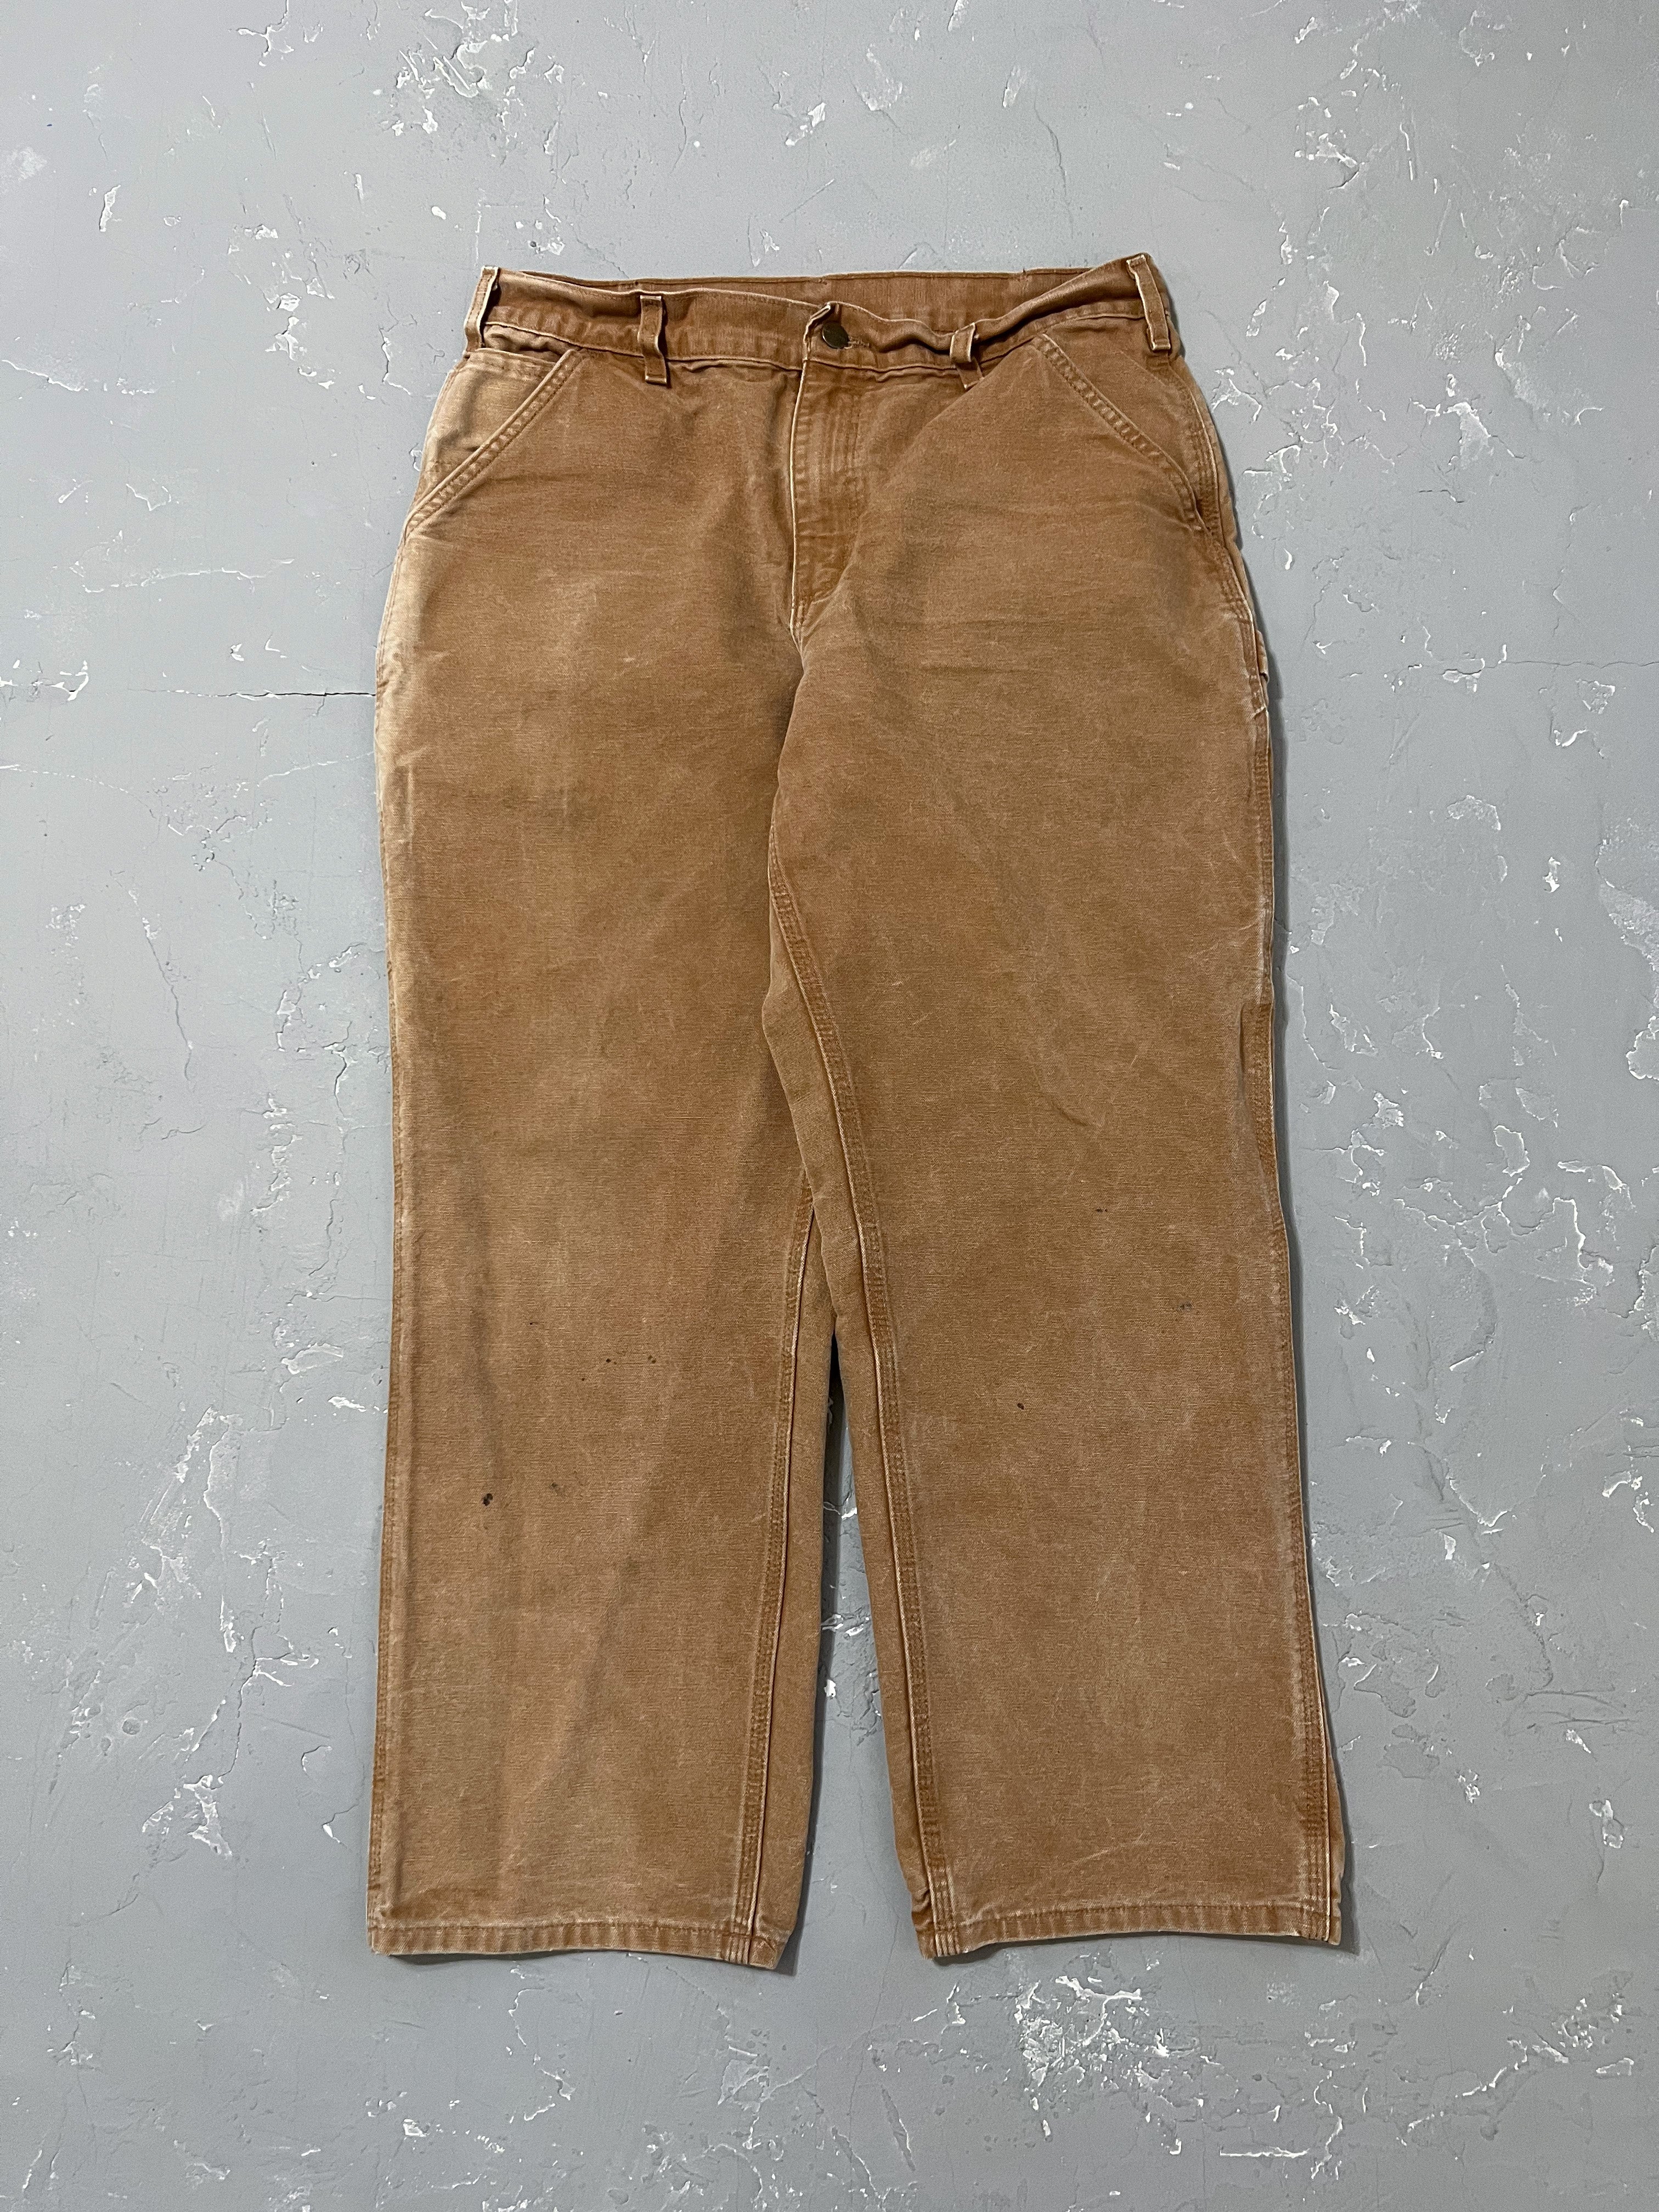 Carhartt Brown Carpenter Pants [34 x 34] – From The Past